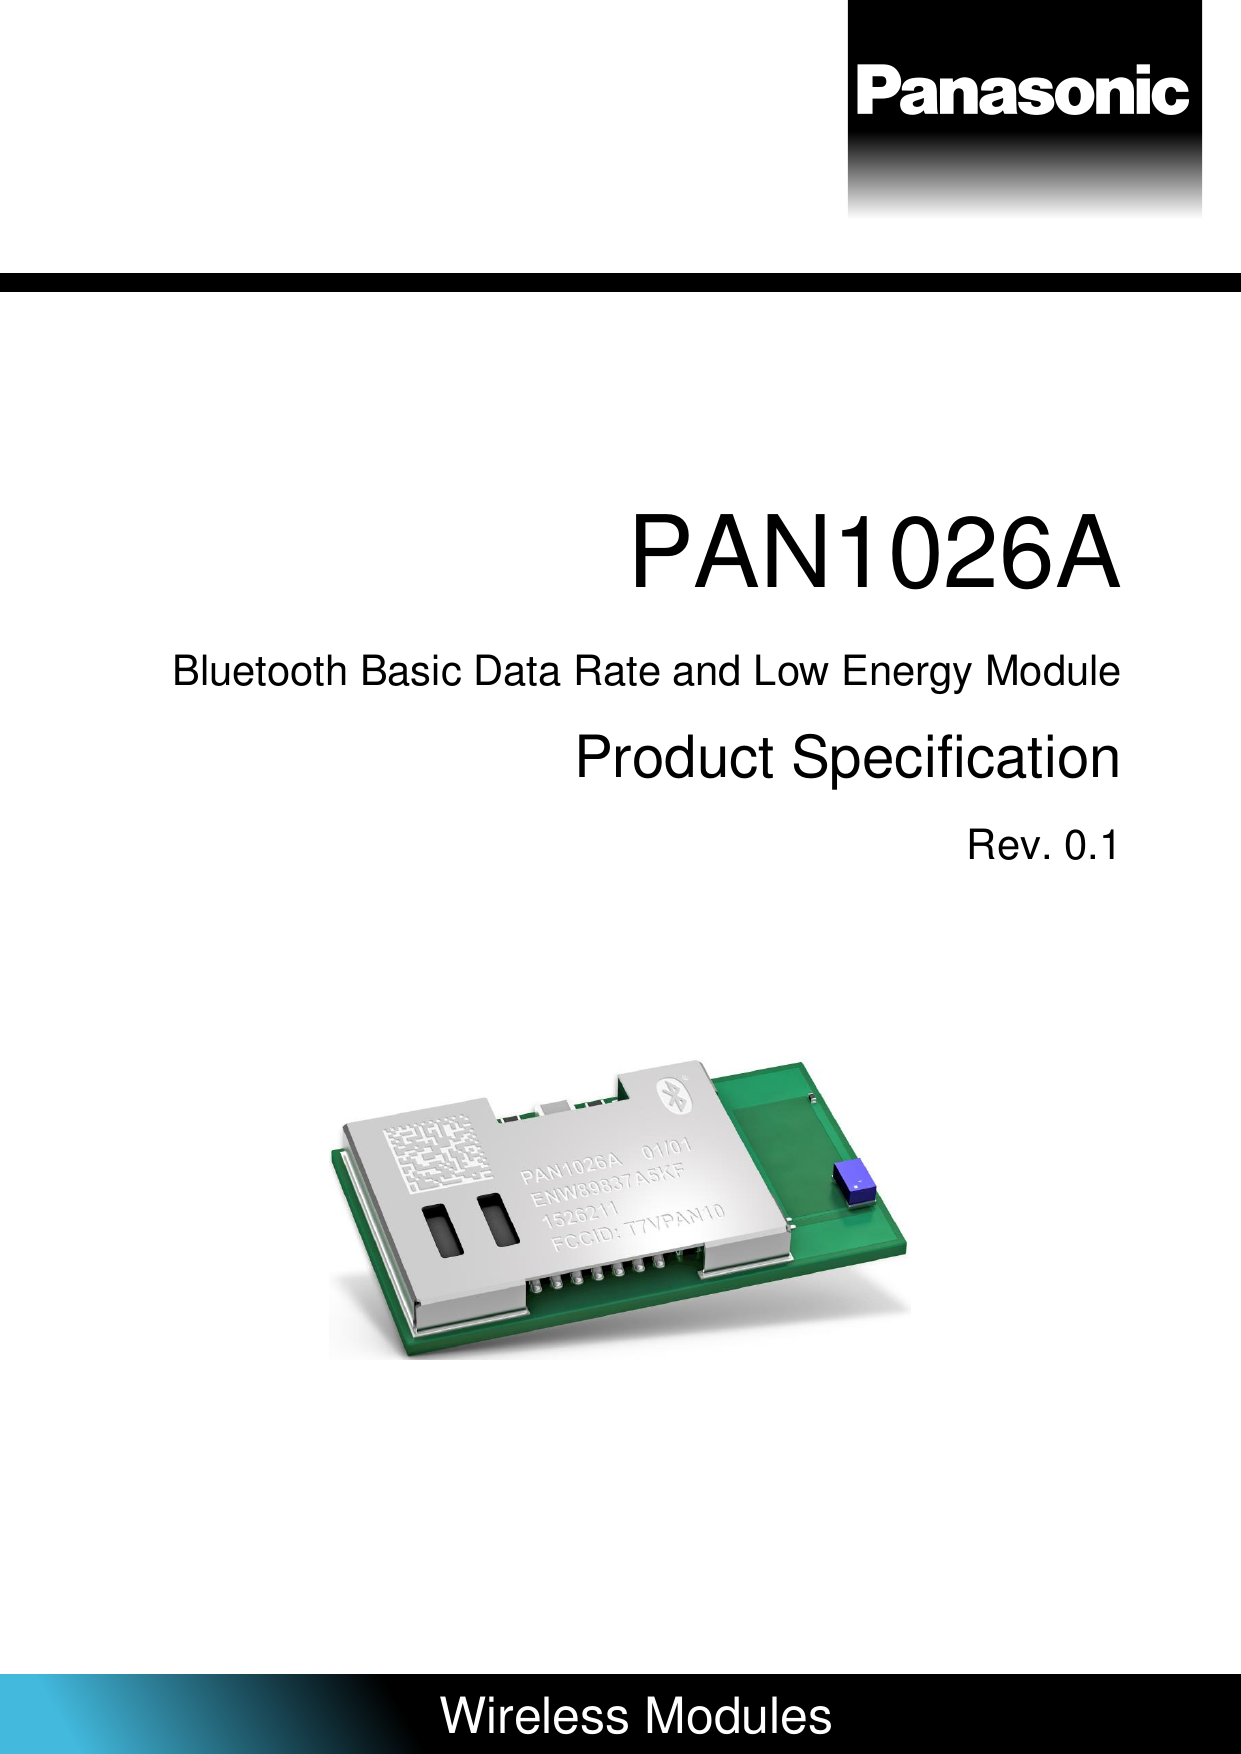             PAN1026A  Bluetooth Basic Data Rate and Low Energy Module Product Specification Rev. 0.1               Wireless Modules   